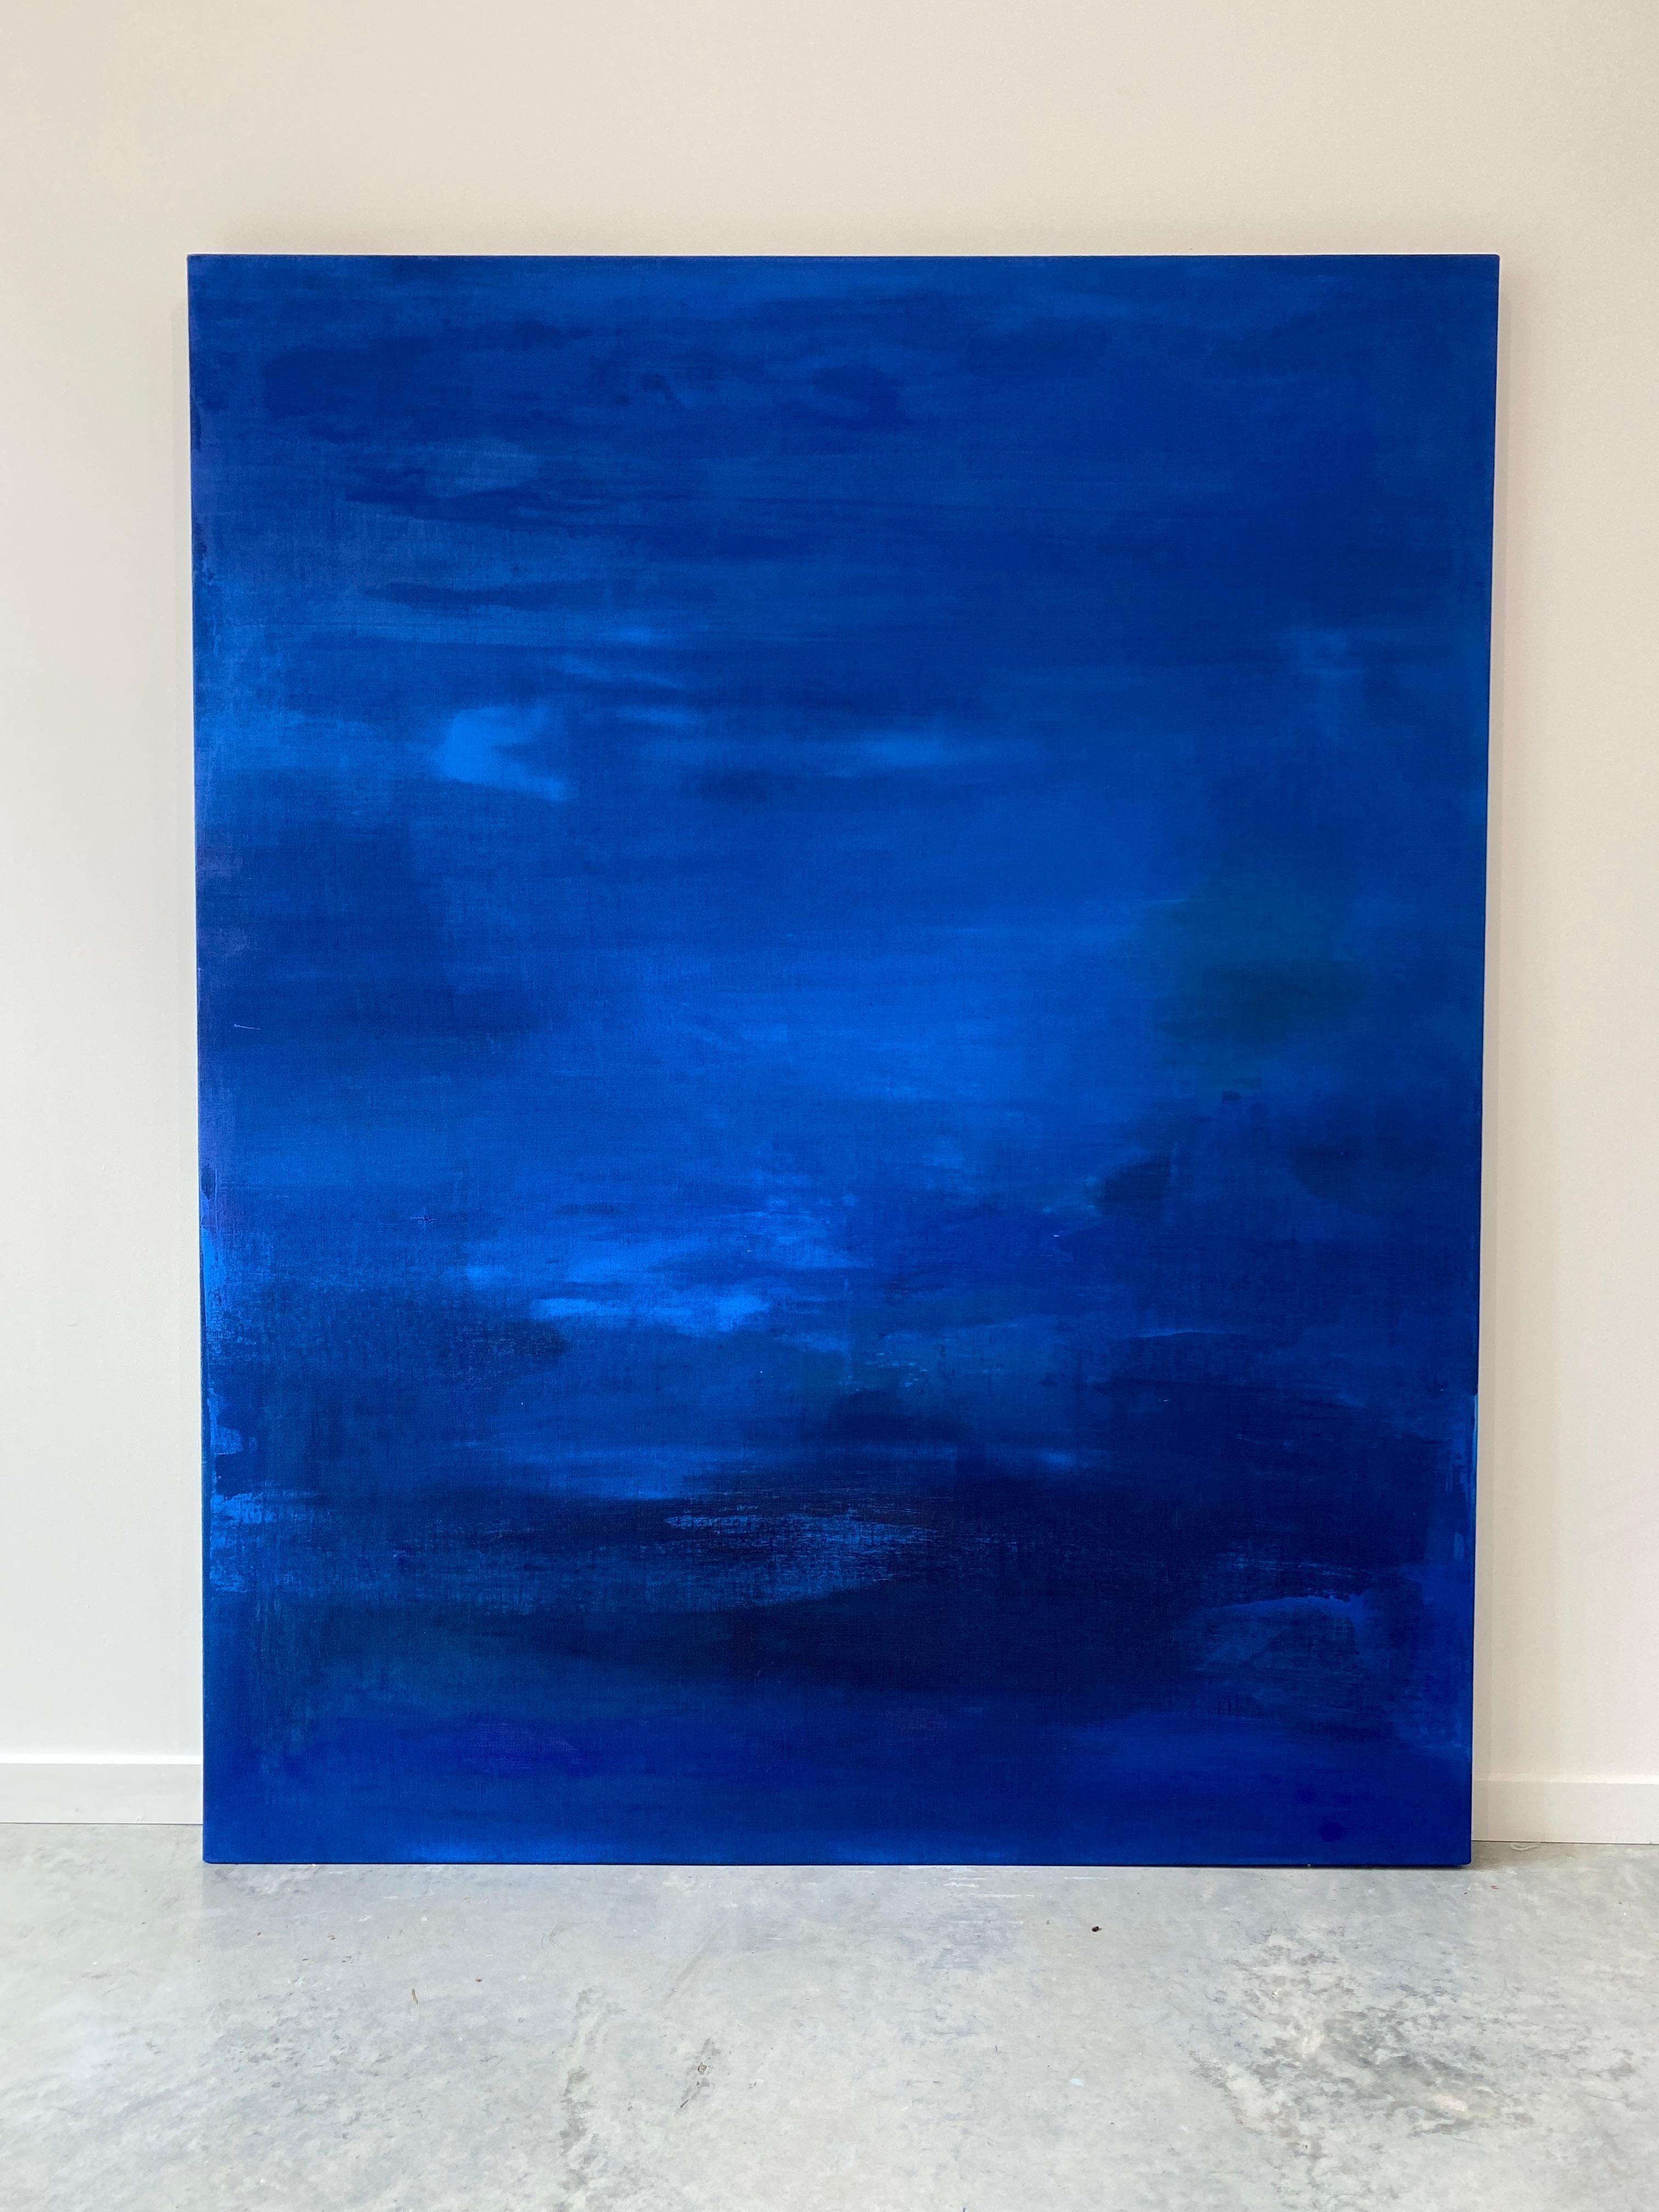 Big Blue cobalt large scale minimalist abstract painting statement artwork For Sale 1